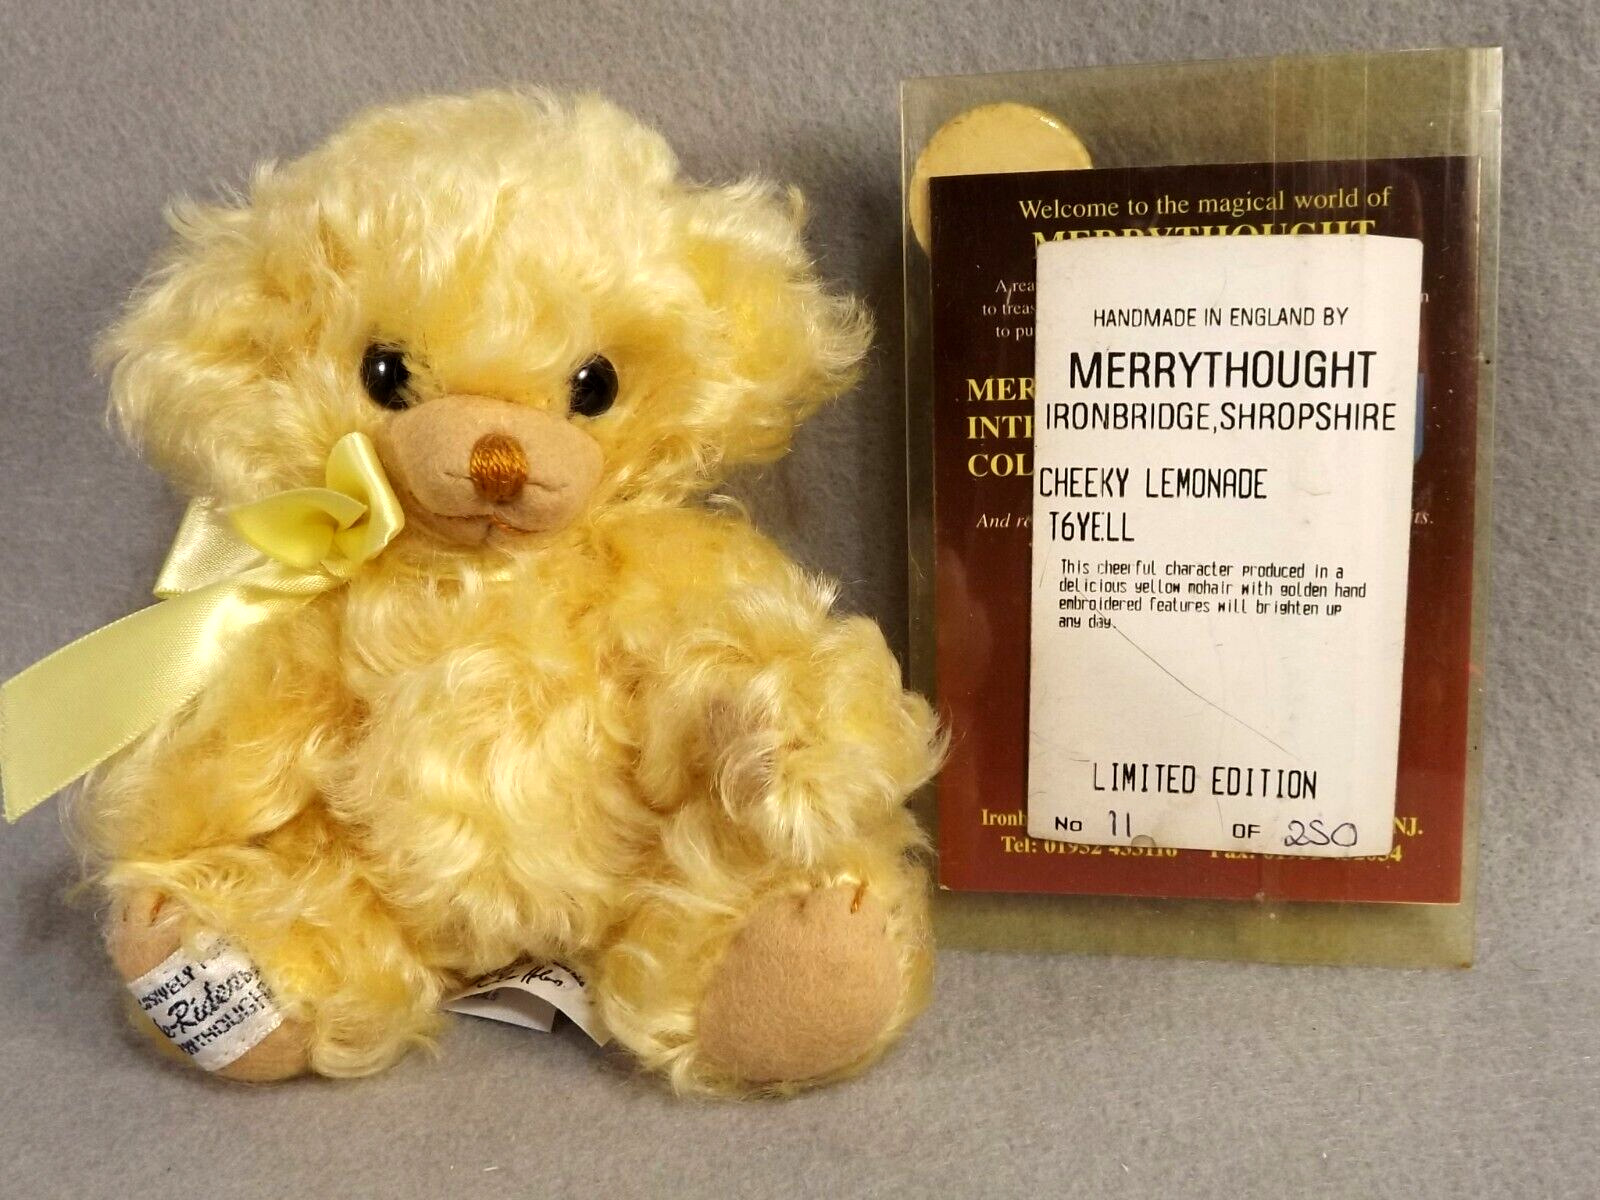 Merrythought Cheeky Bear Lemonade T6YELL Limited Edition 11 of 250 Mohair 1998